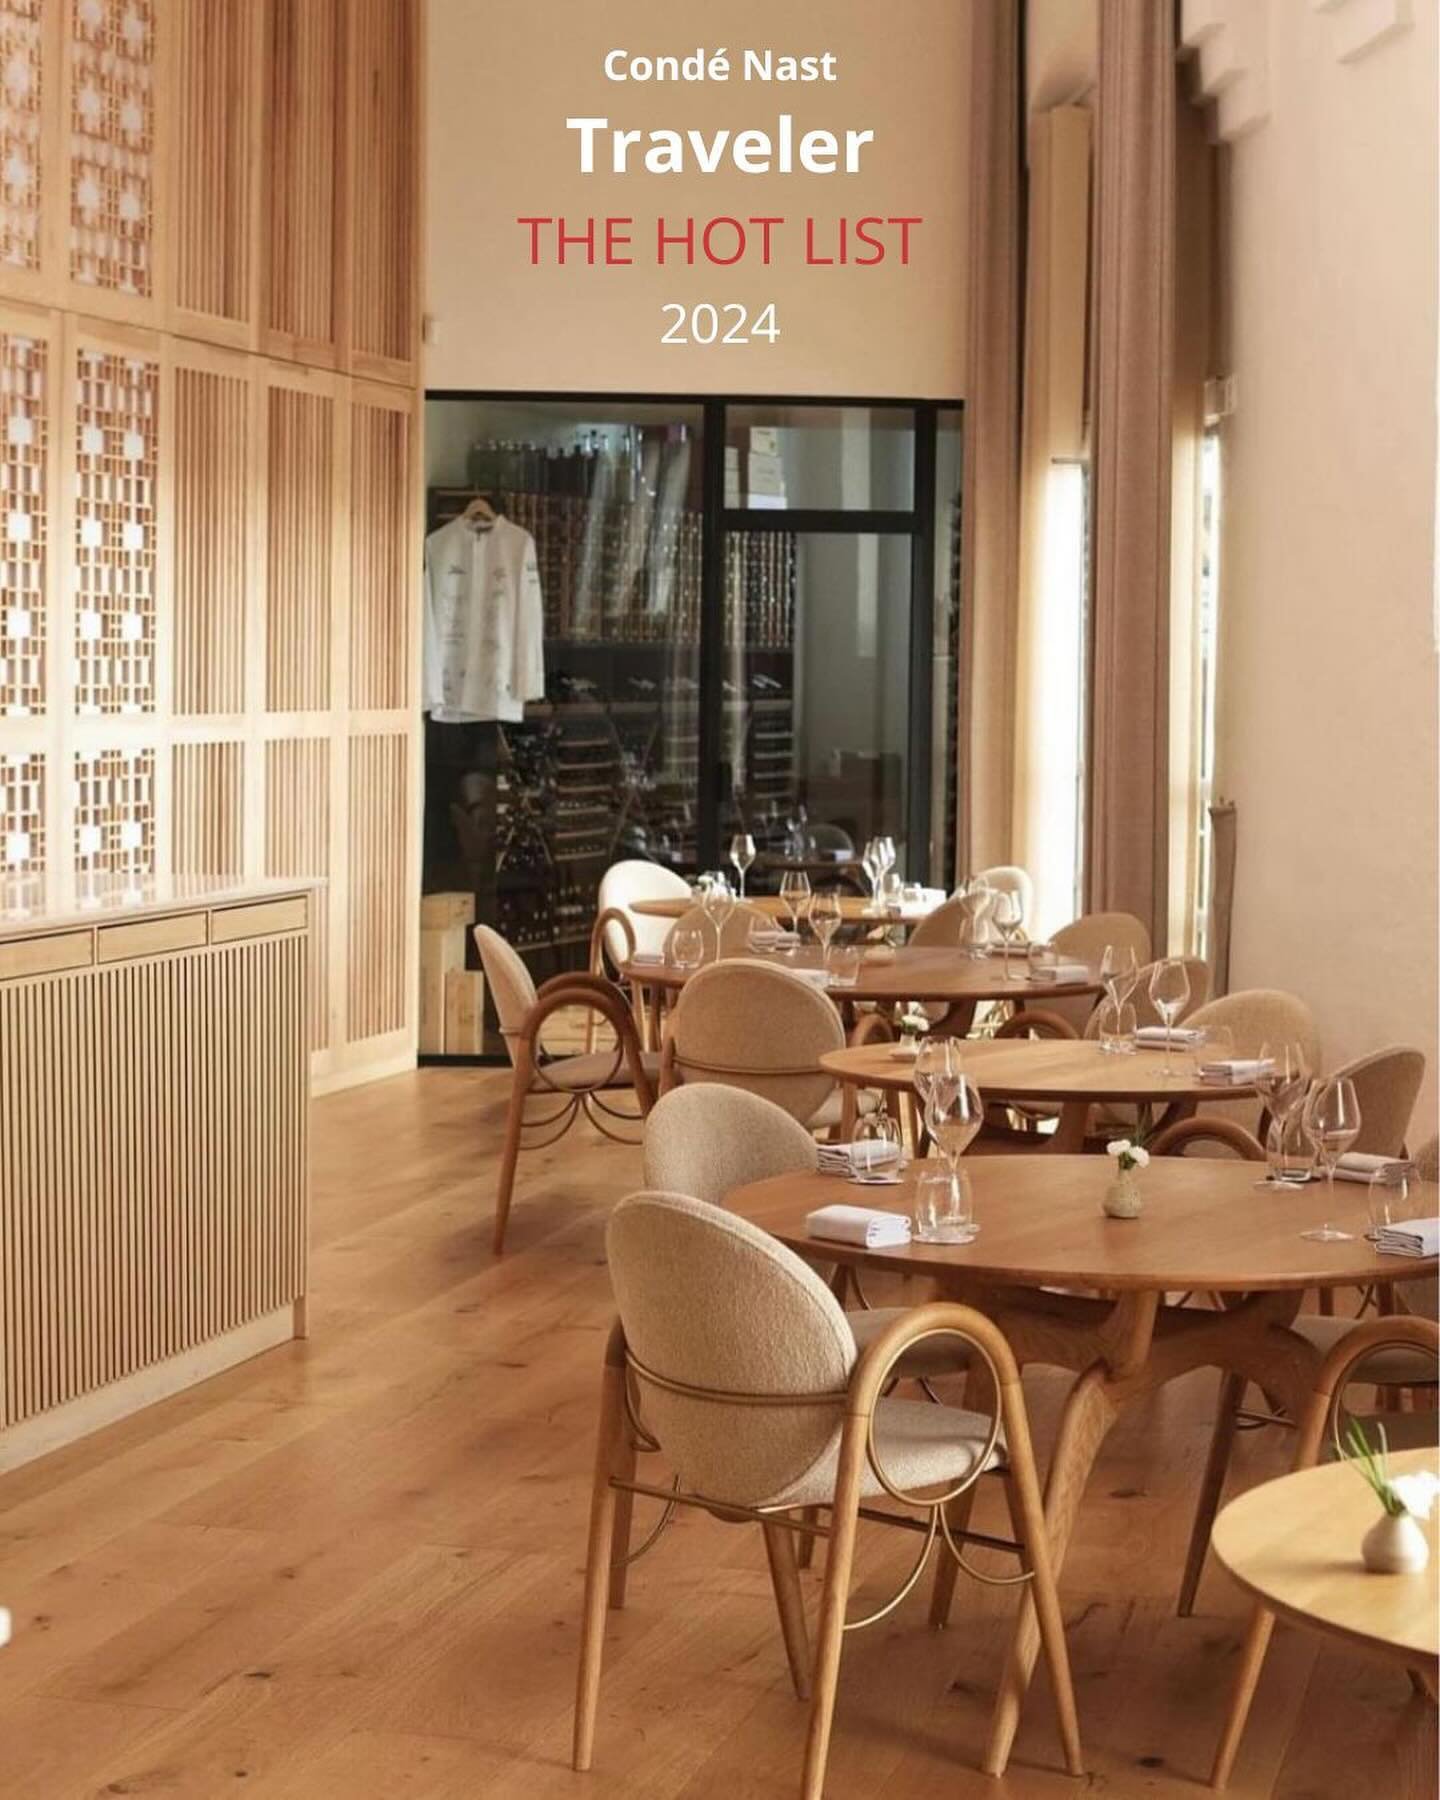 Congratulations to the team of @koancph ** who have been recognised on the 2024 @cntraveler Hot List announced last week. 

Each spring Cond&eacute; Nast Traveler releases its Hot List awards, an annual collection of the world&rsquo;s best new hotels